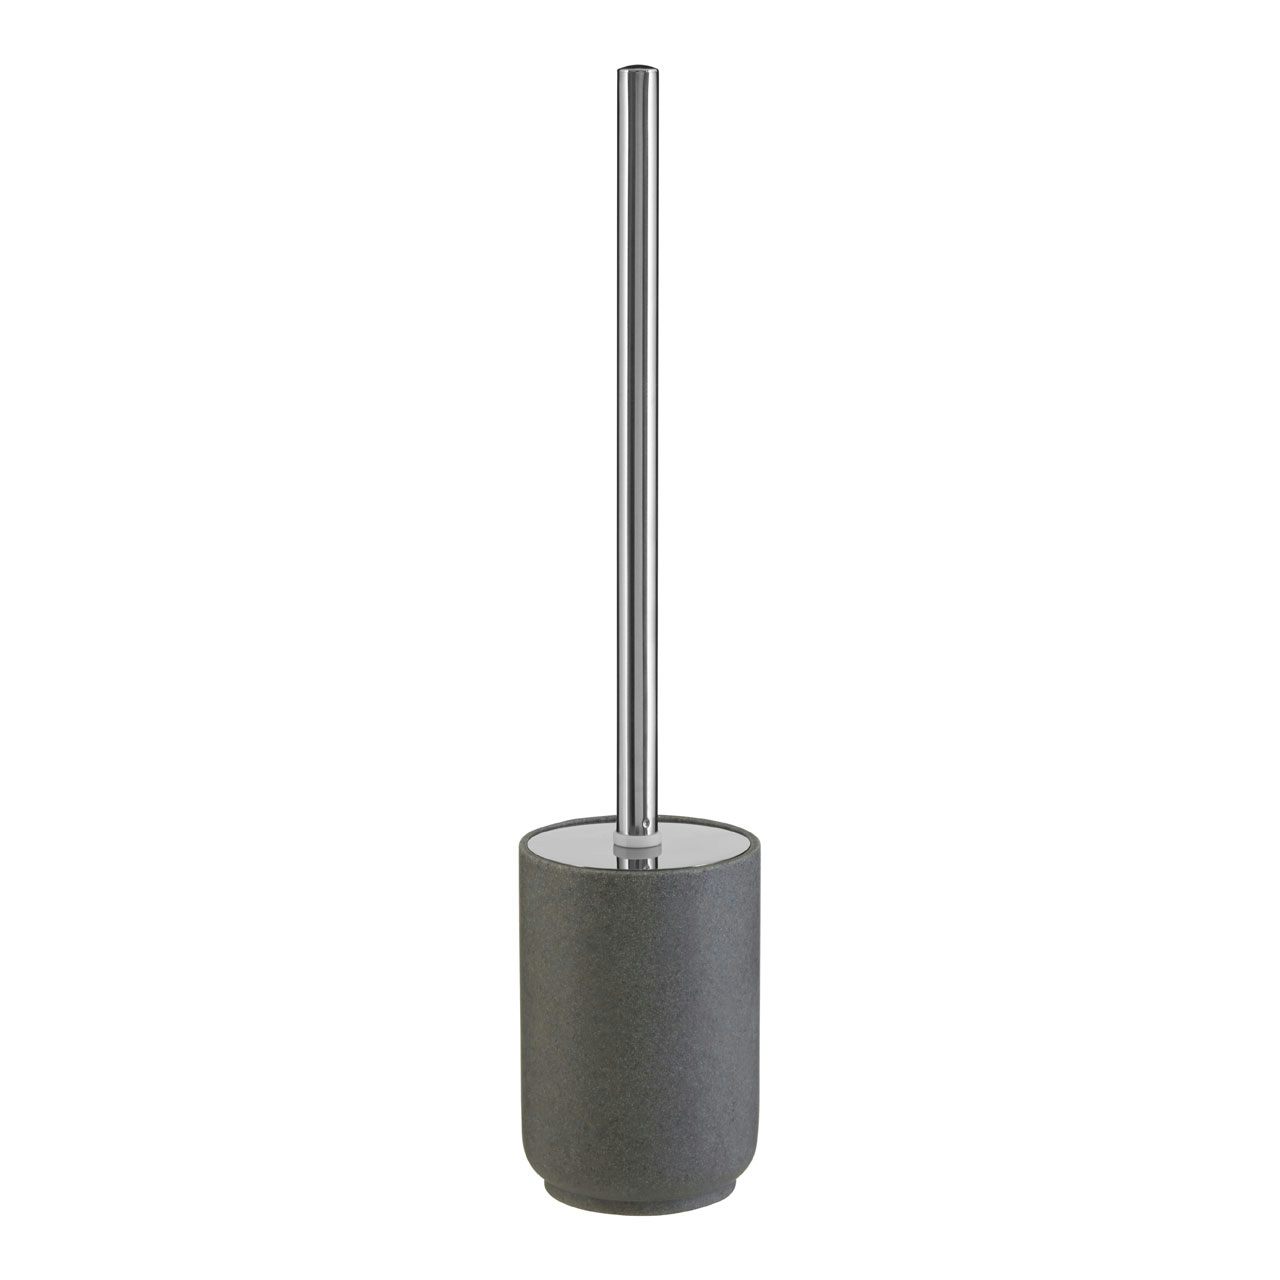 Accents Mineral Stone grey resin toilet brush and holder